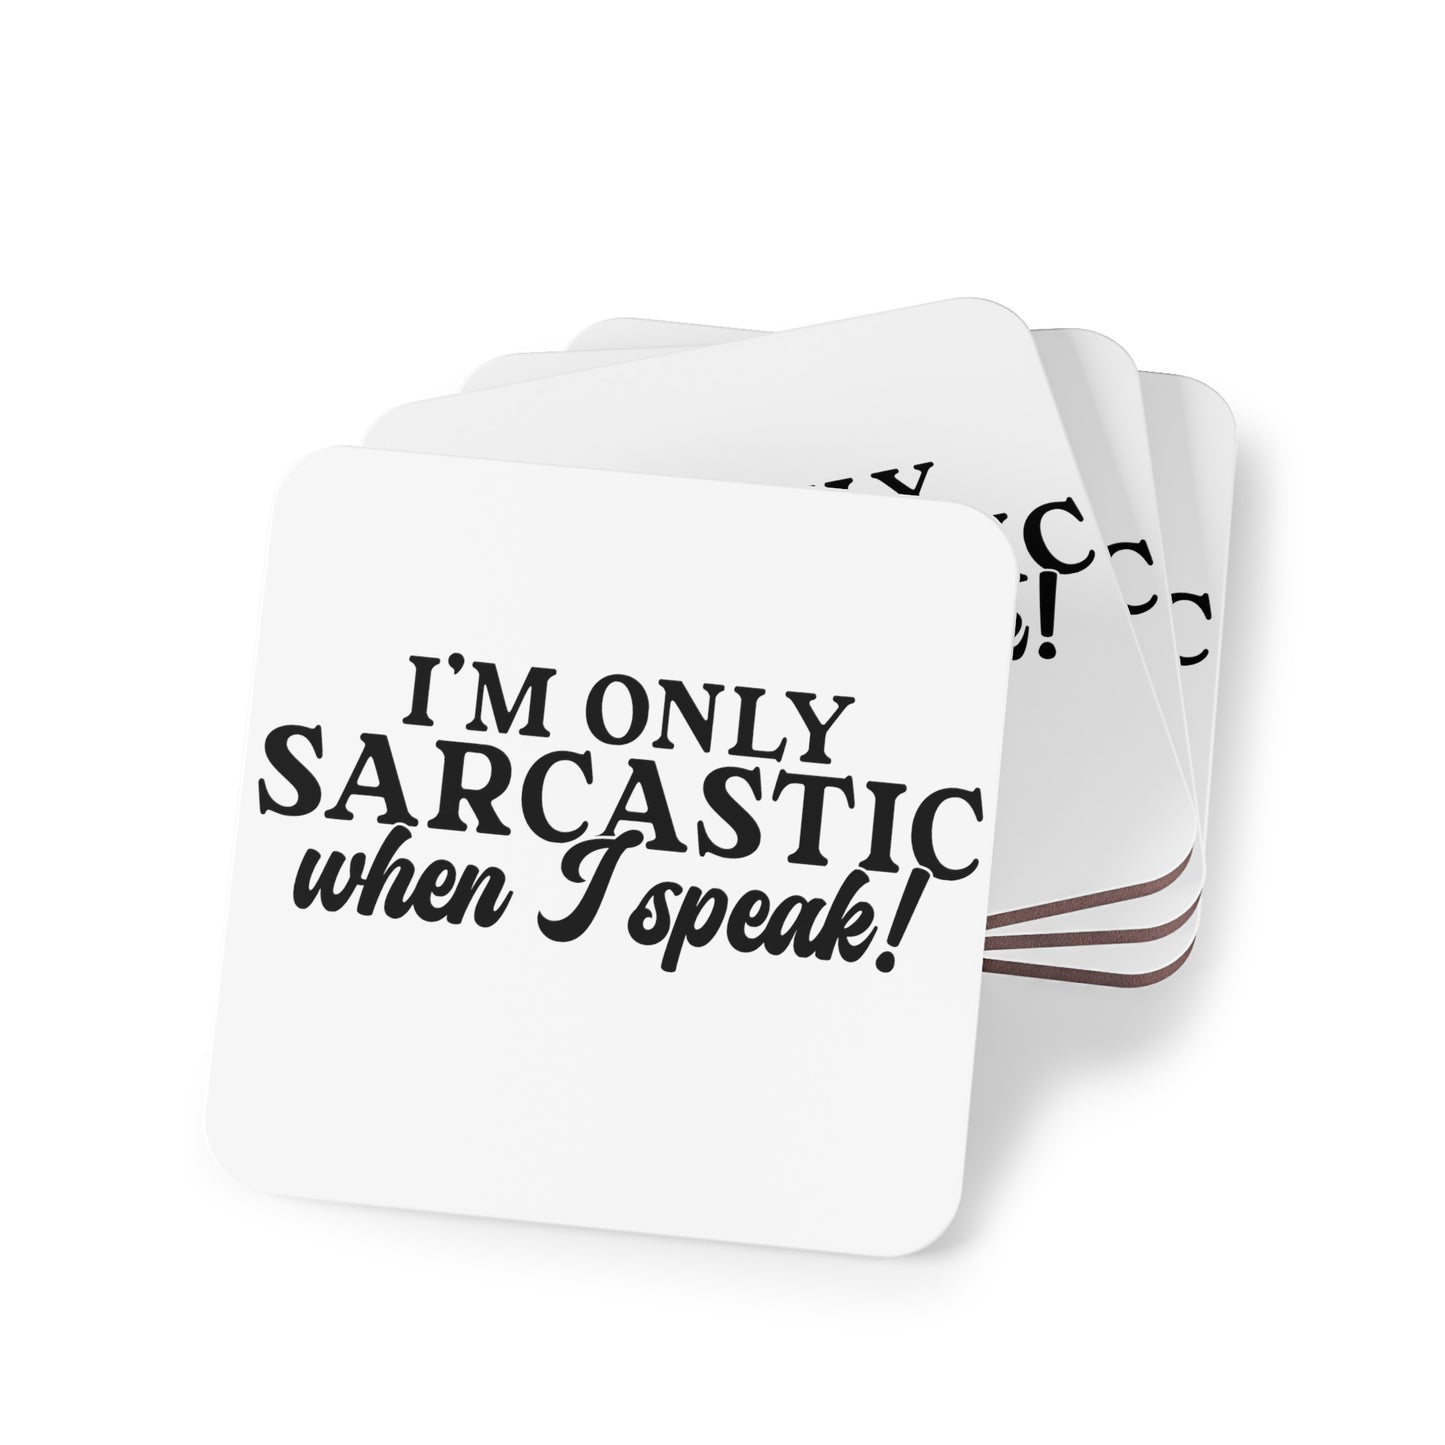 "I'm Only Sarcastic When I Speak" Square Coasters